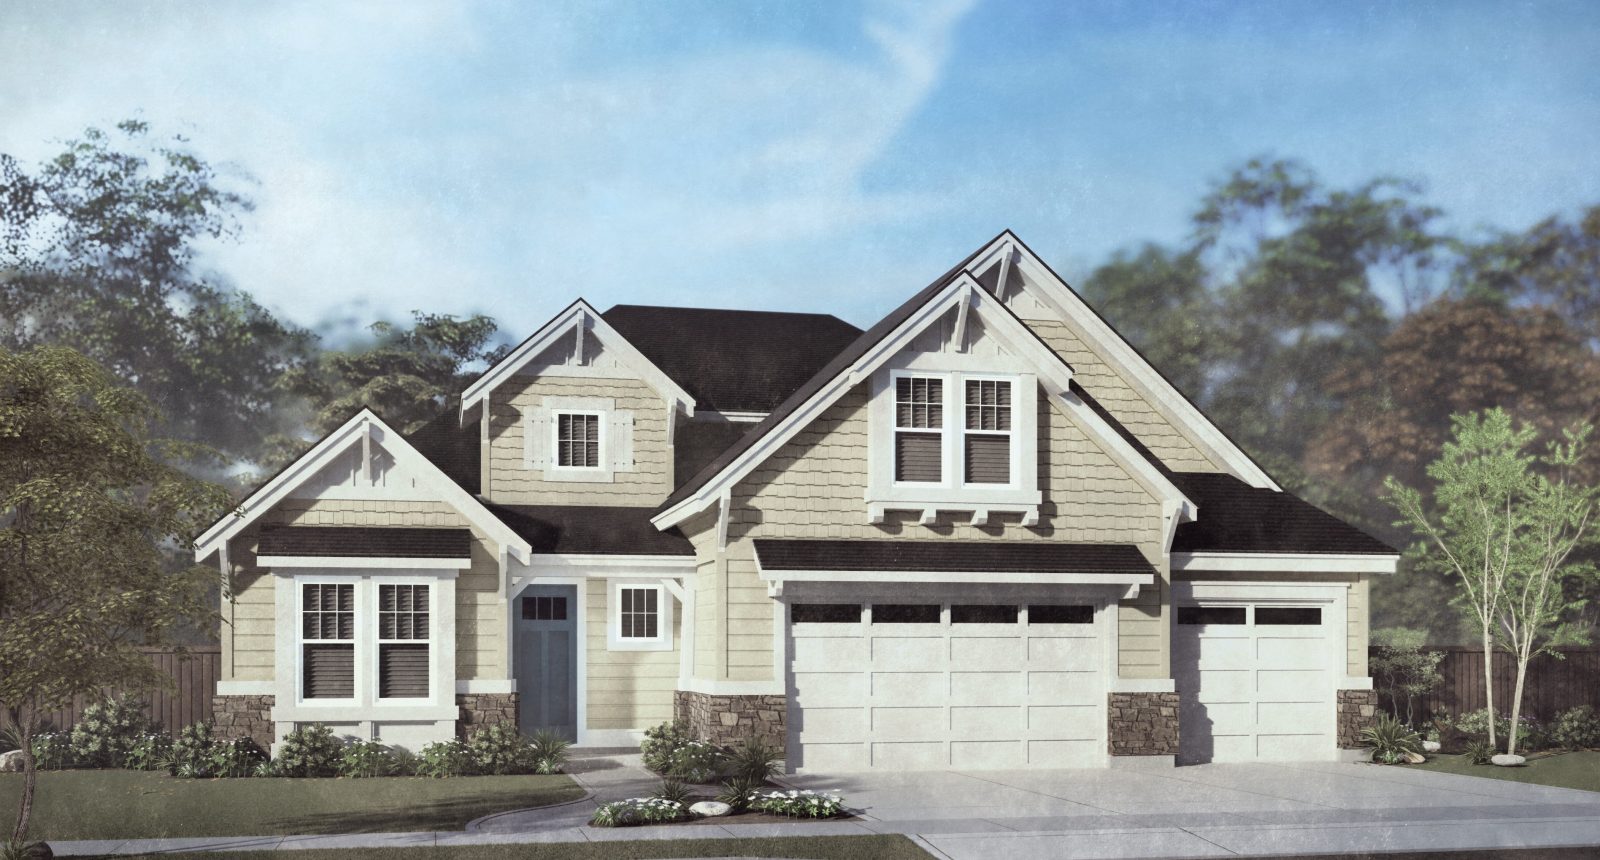 Edgewater C - 2 Story House Plans in Meridian ID